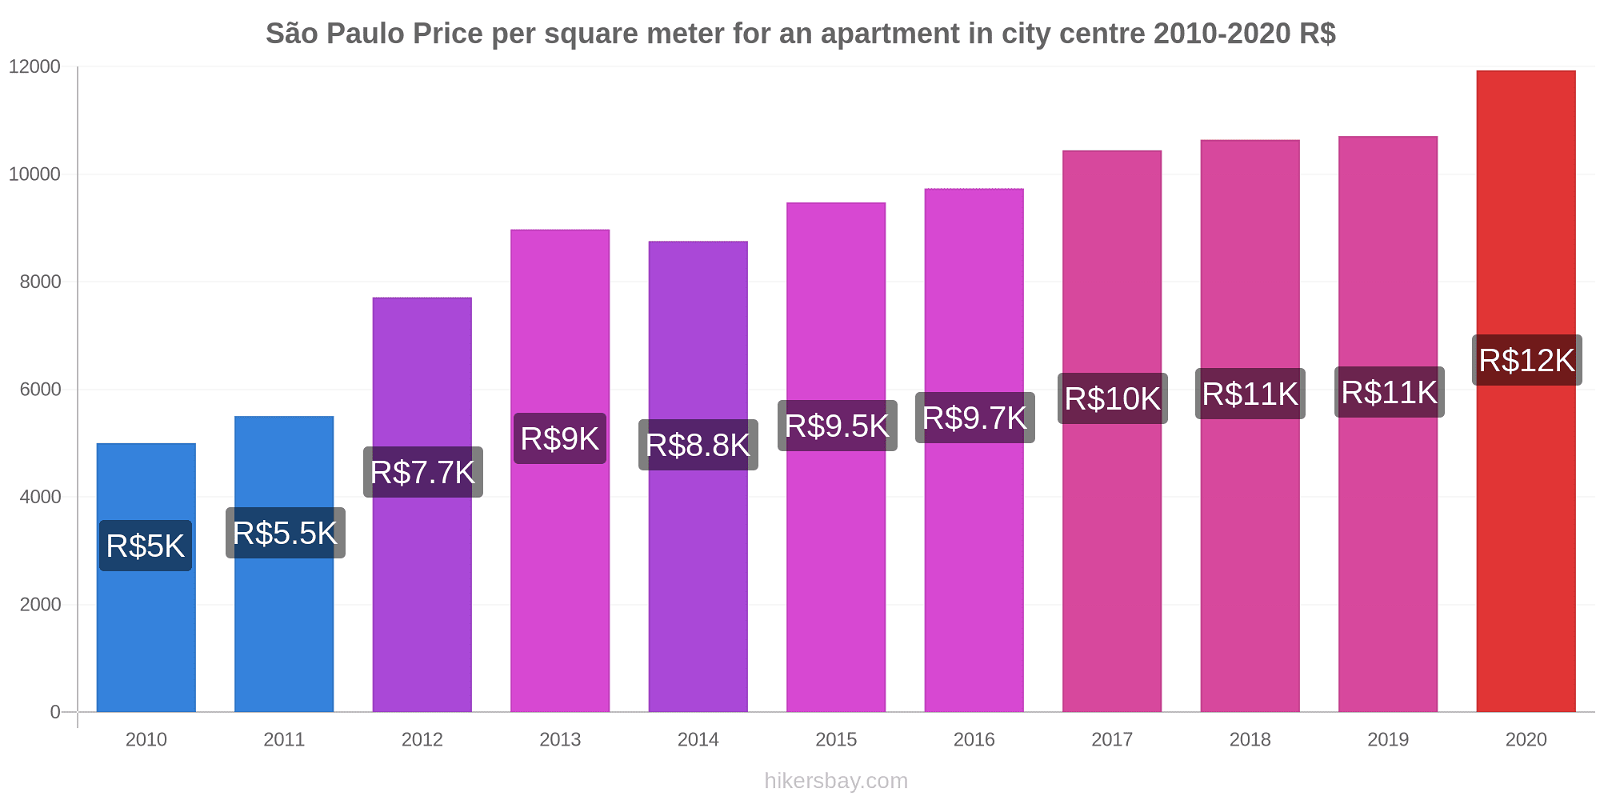 São Paulo price changes Price per square meter for an apartment in city centre hikersbay.com